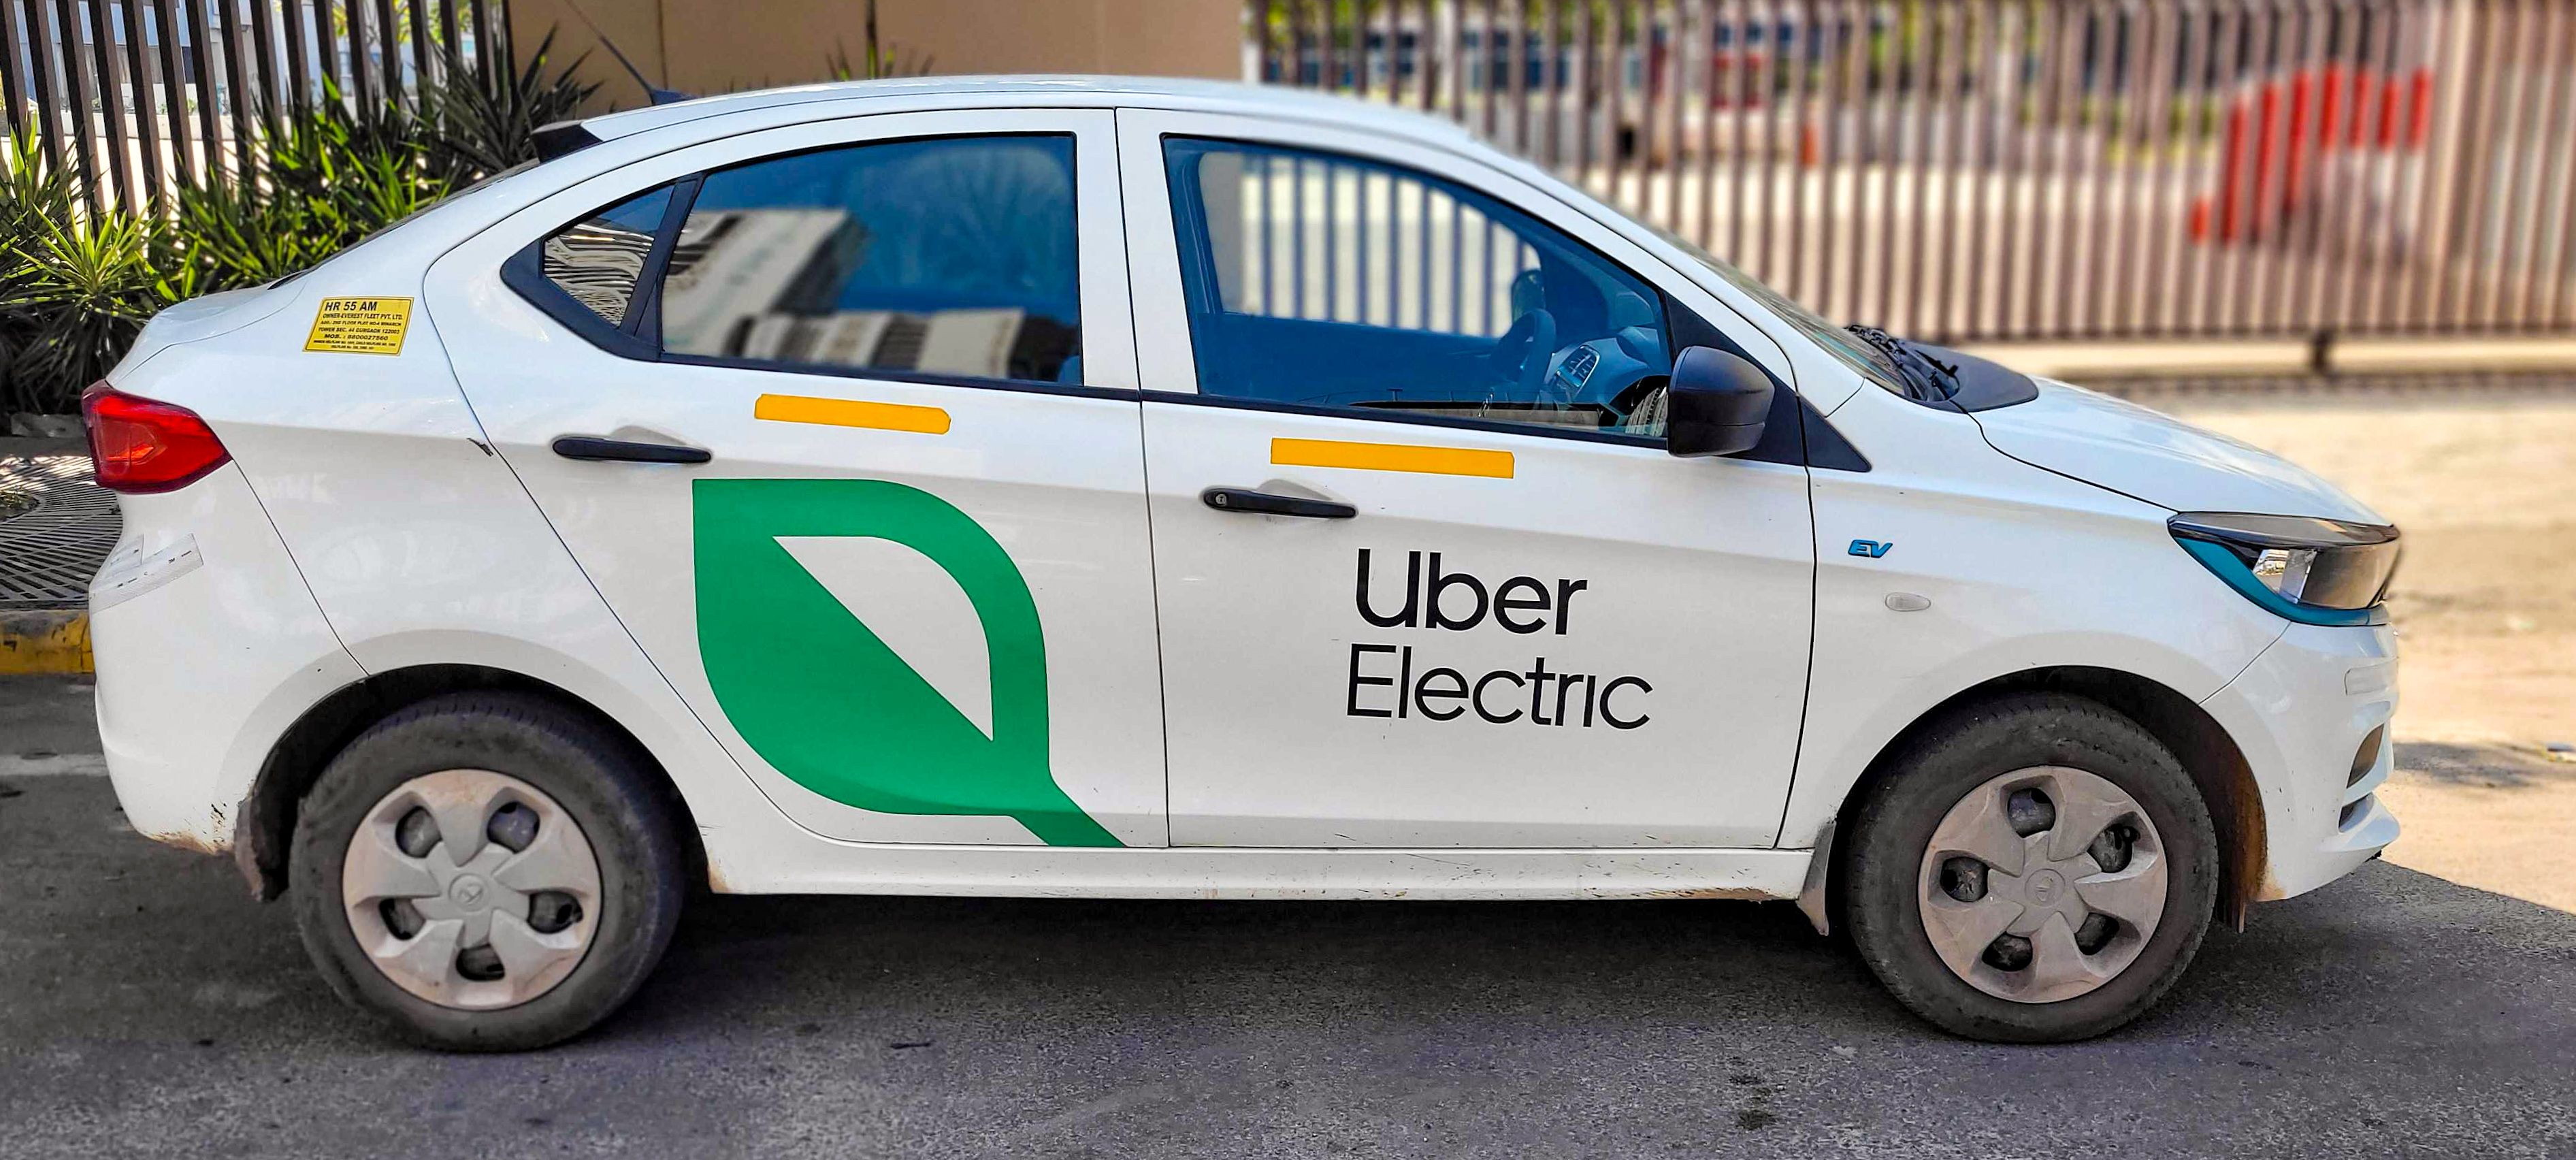 Uber pilots electric cabs in Delhi to reduce emissions